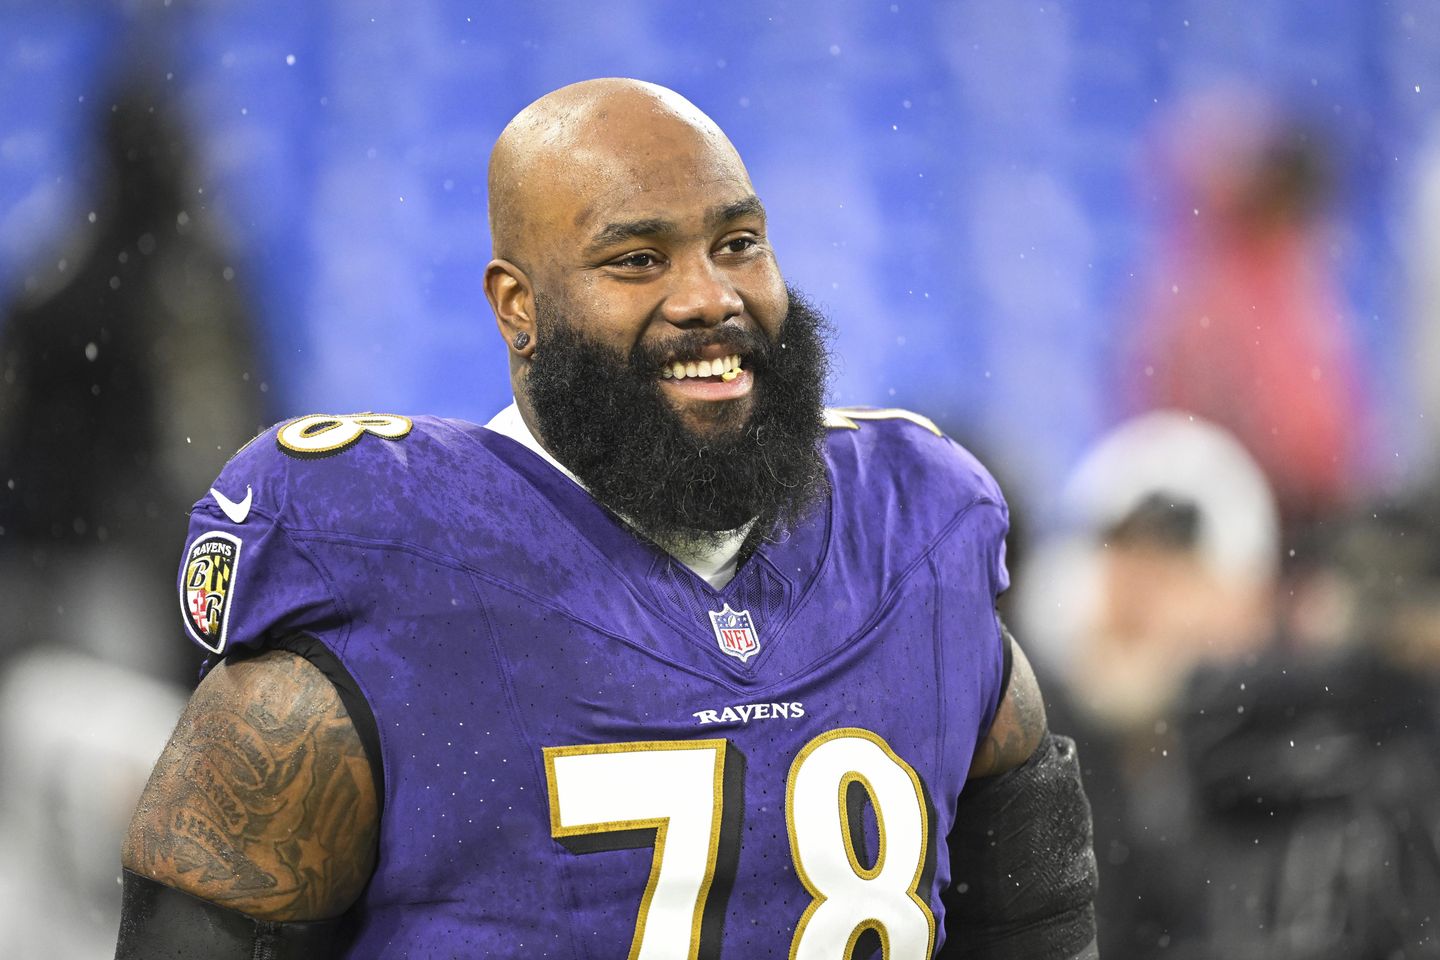 Jets acquiring offensive tackle Morgan Moses from Ravens in deal that includes picks
